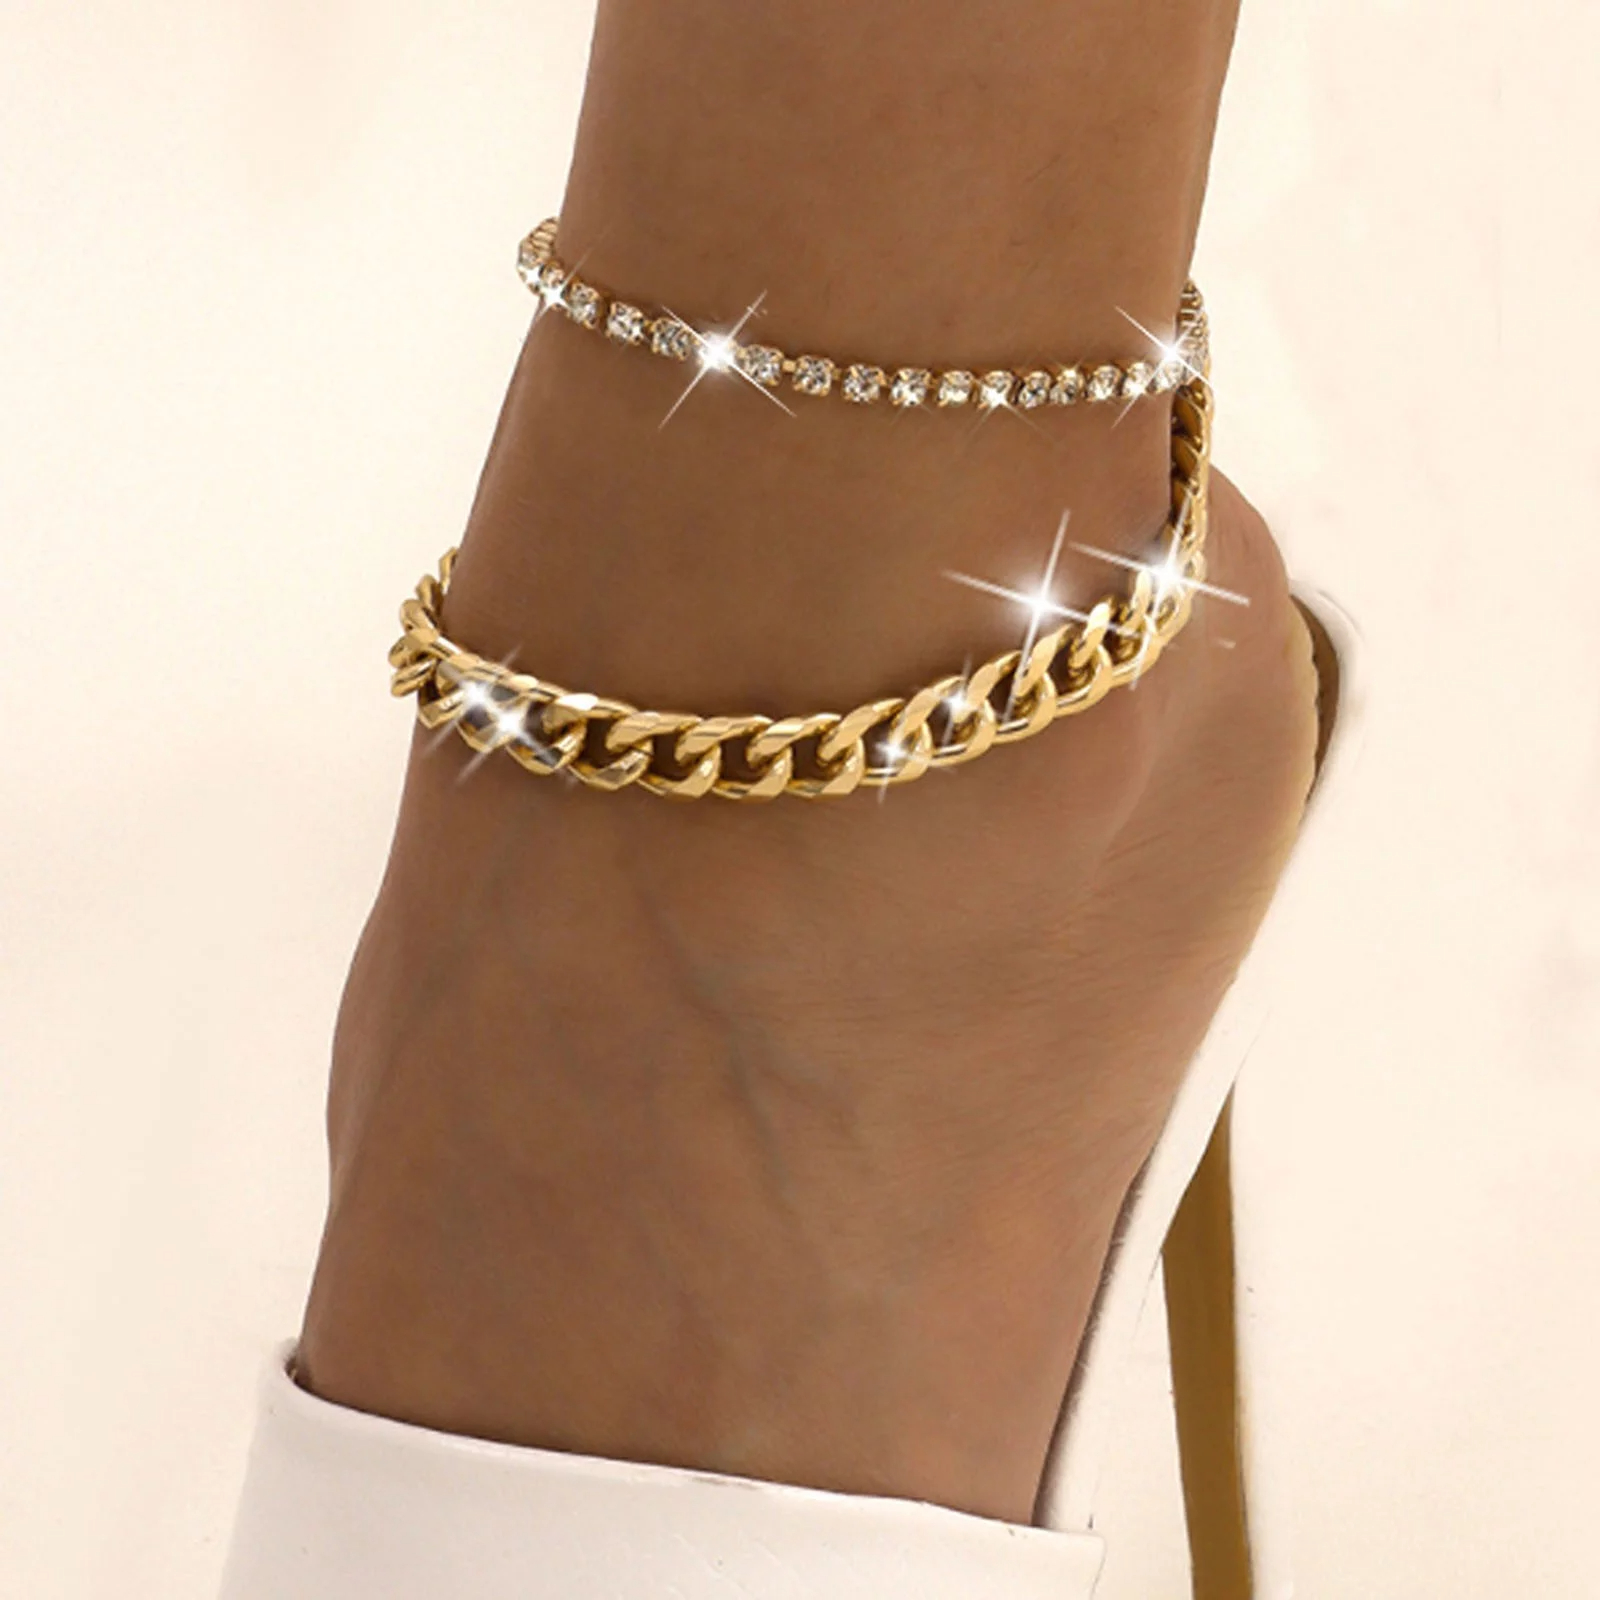 Gold ankle bracelets, also known as anklets, are versatile and timeless accessories that can add a touch of elegance and charm to any outfit.